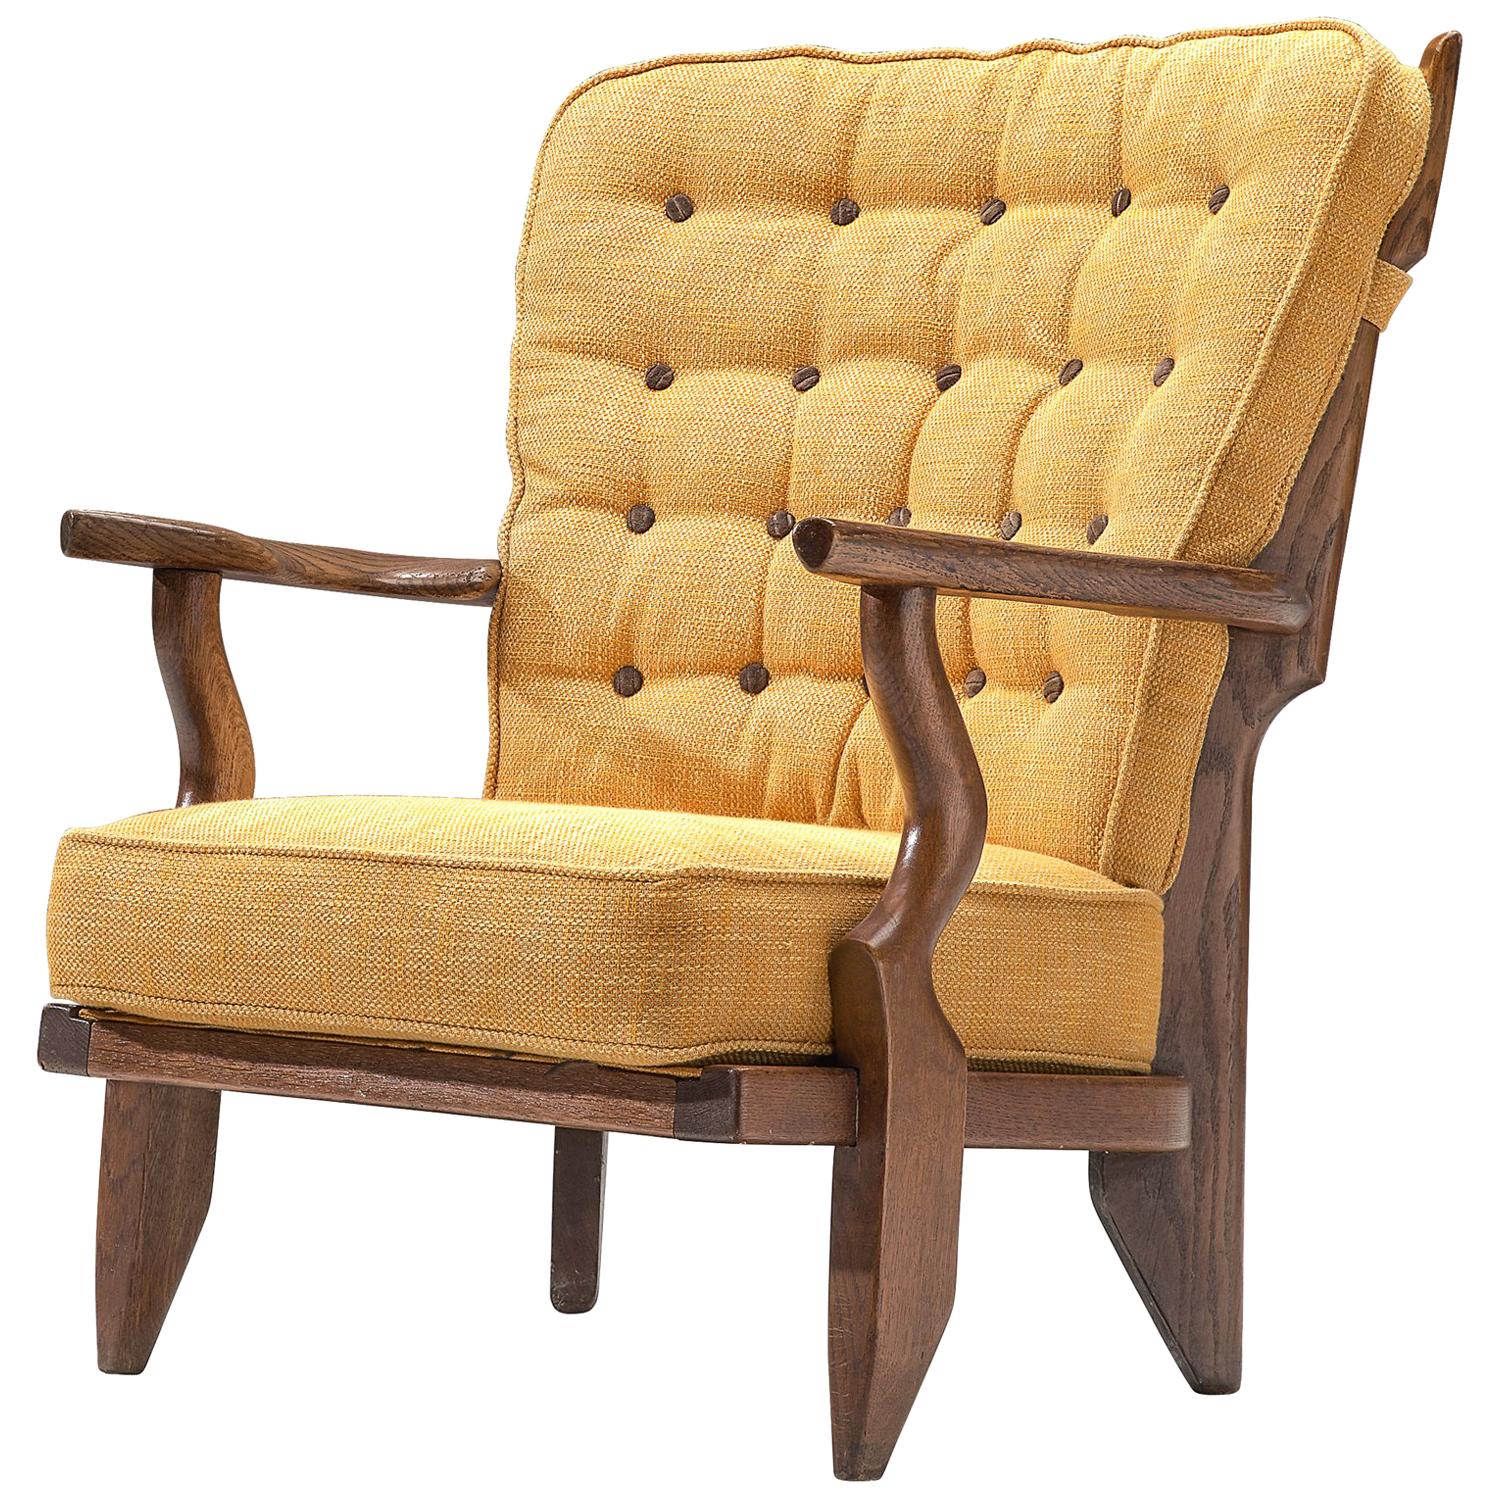 Guillerme and Chambron 'Mid Repos' Lounge Chair in Solid Oak